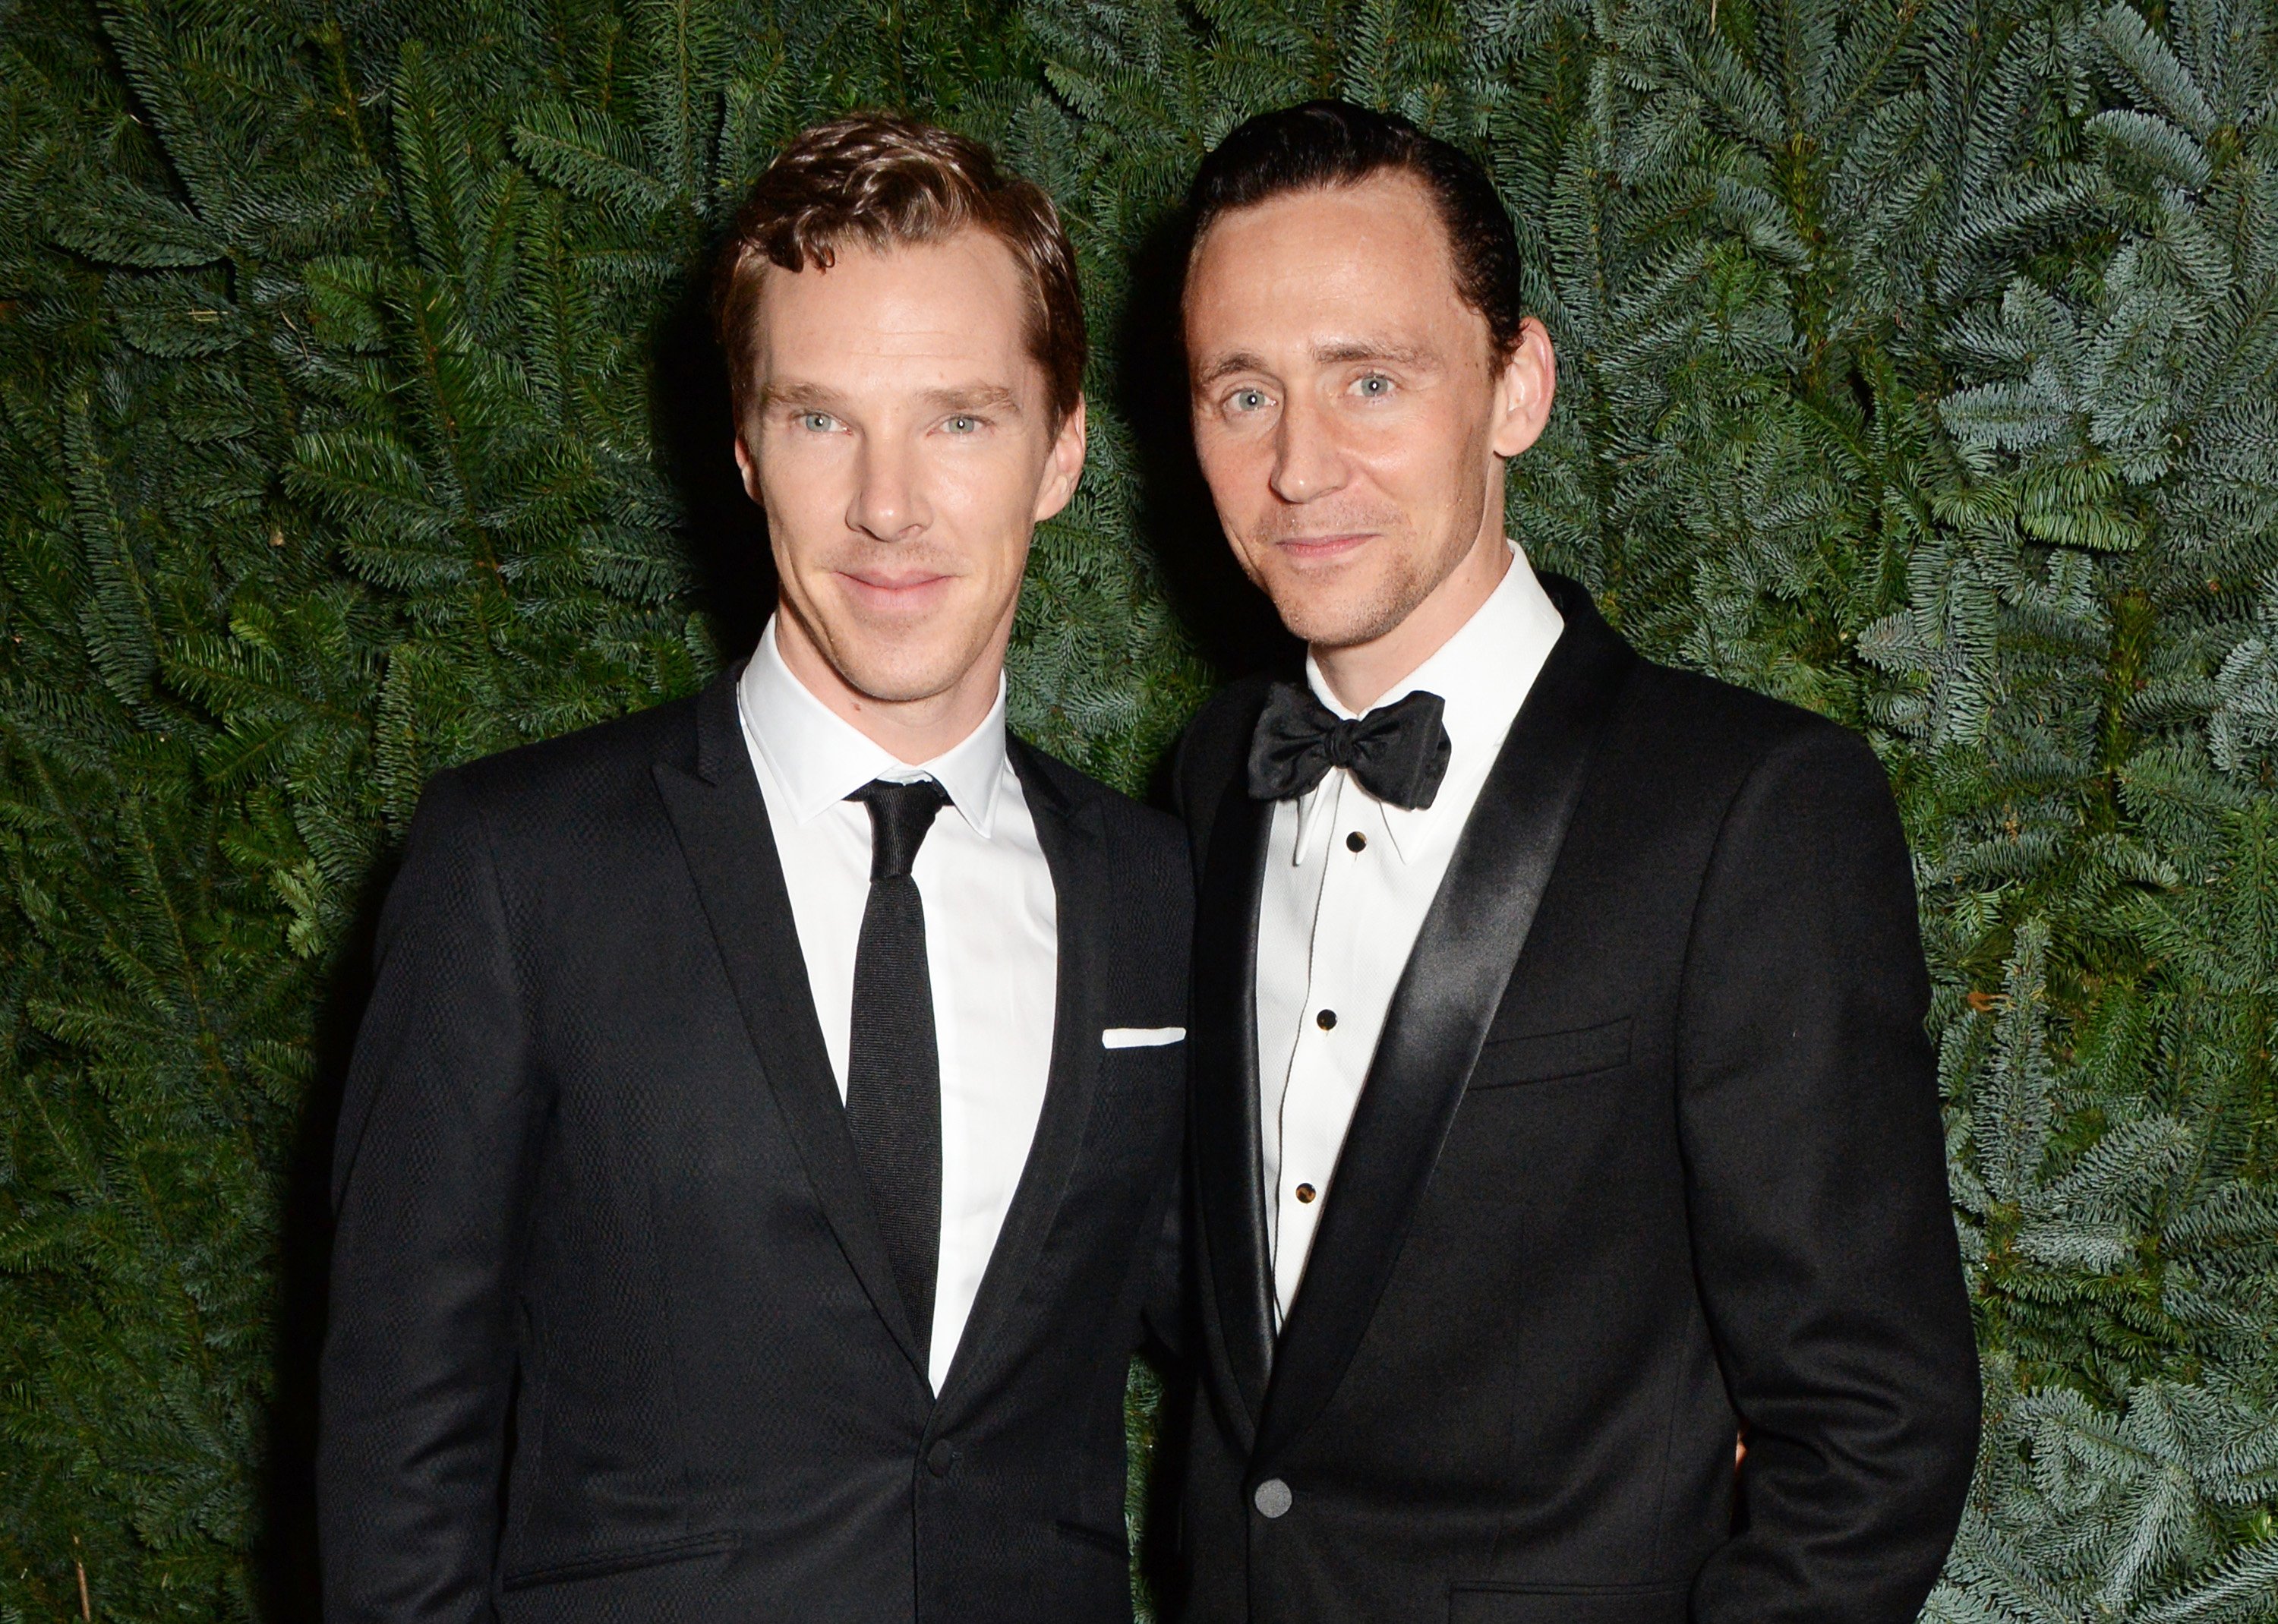 'Doctor Strange 2' star Benedict Cumberbatch and 'Loki' star Tom Hiddleston pose for pictures. Cumberbatch wears a black suit over a white button-up shirt and black tie. Hiddleston wears a black tux with a black bow tie.